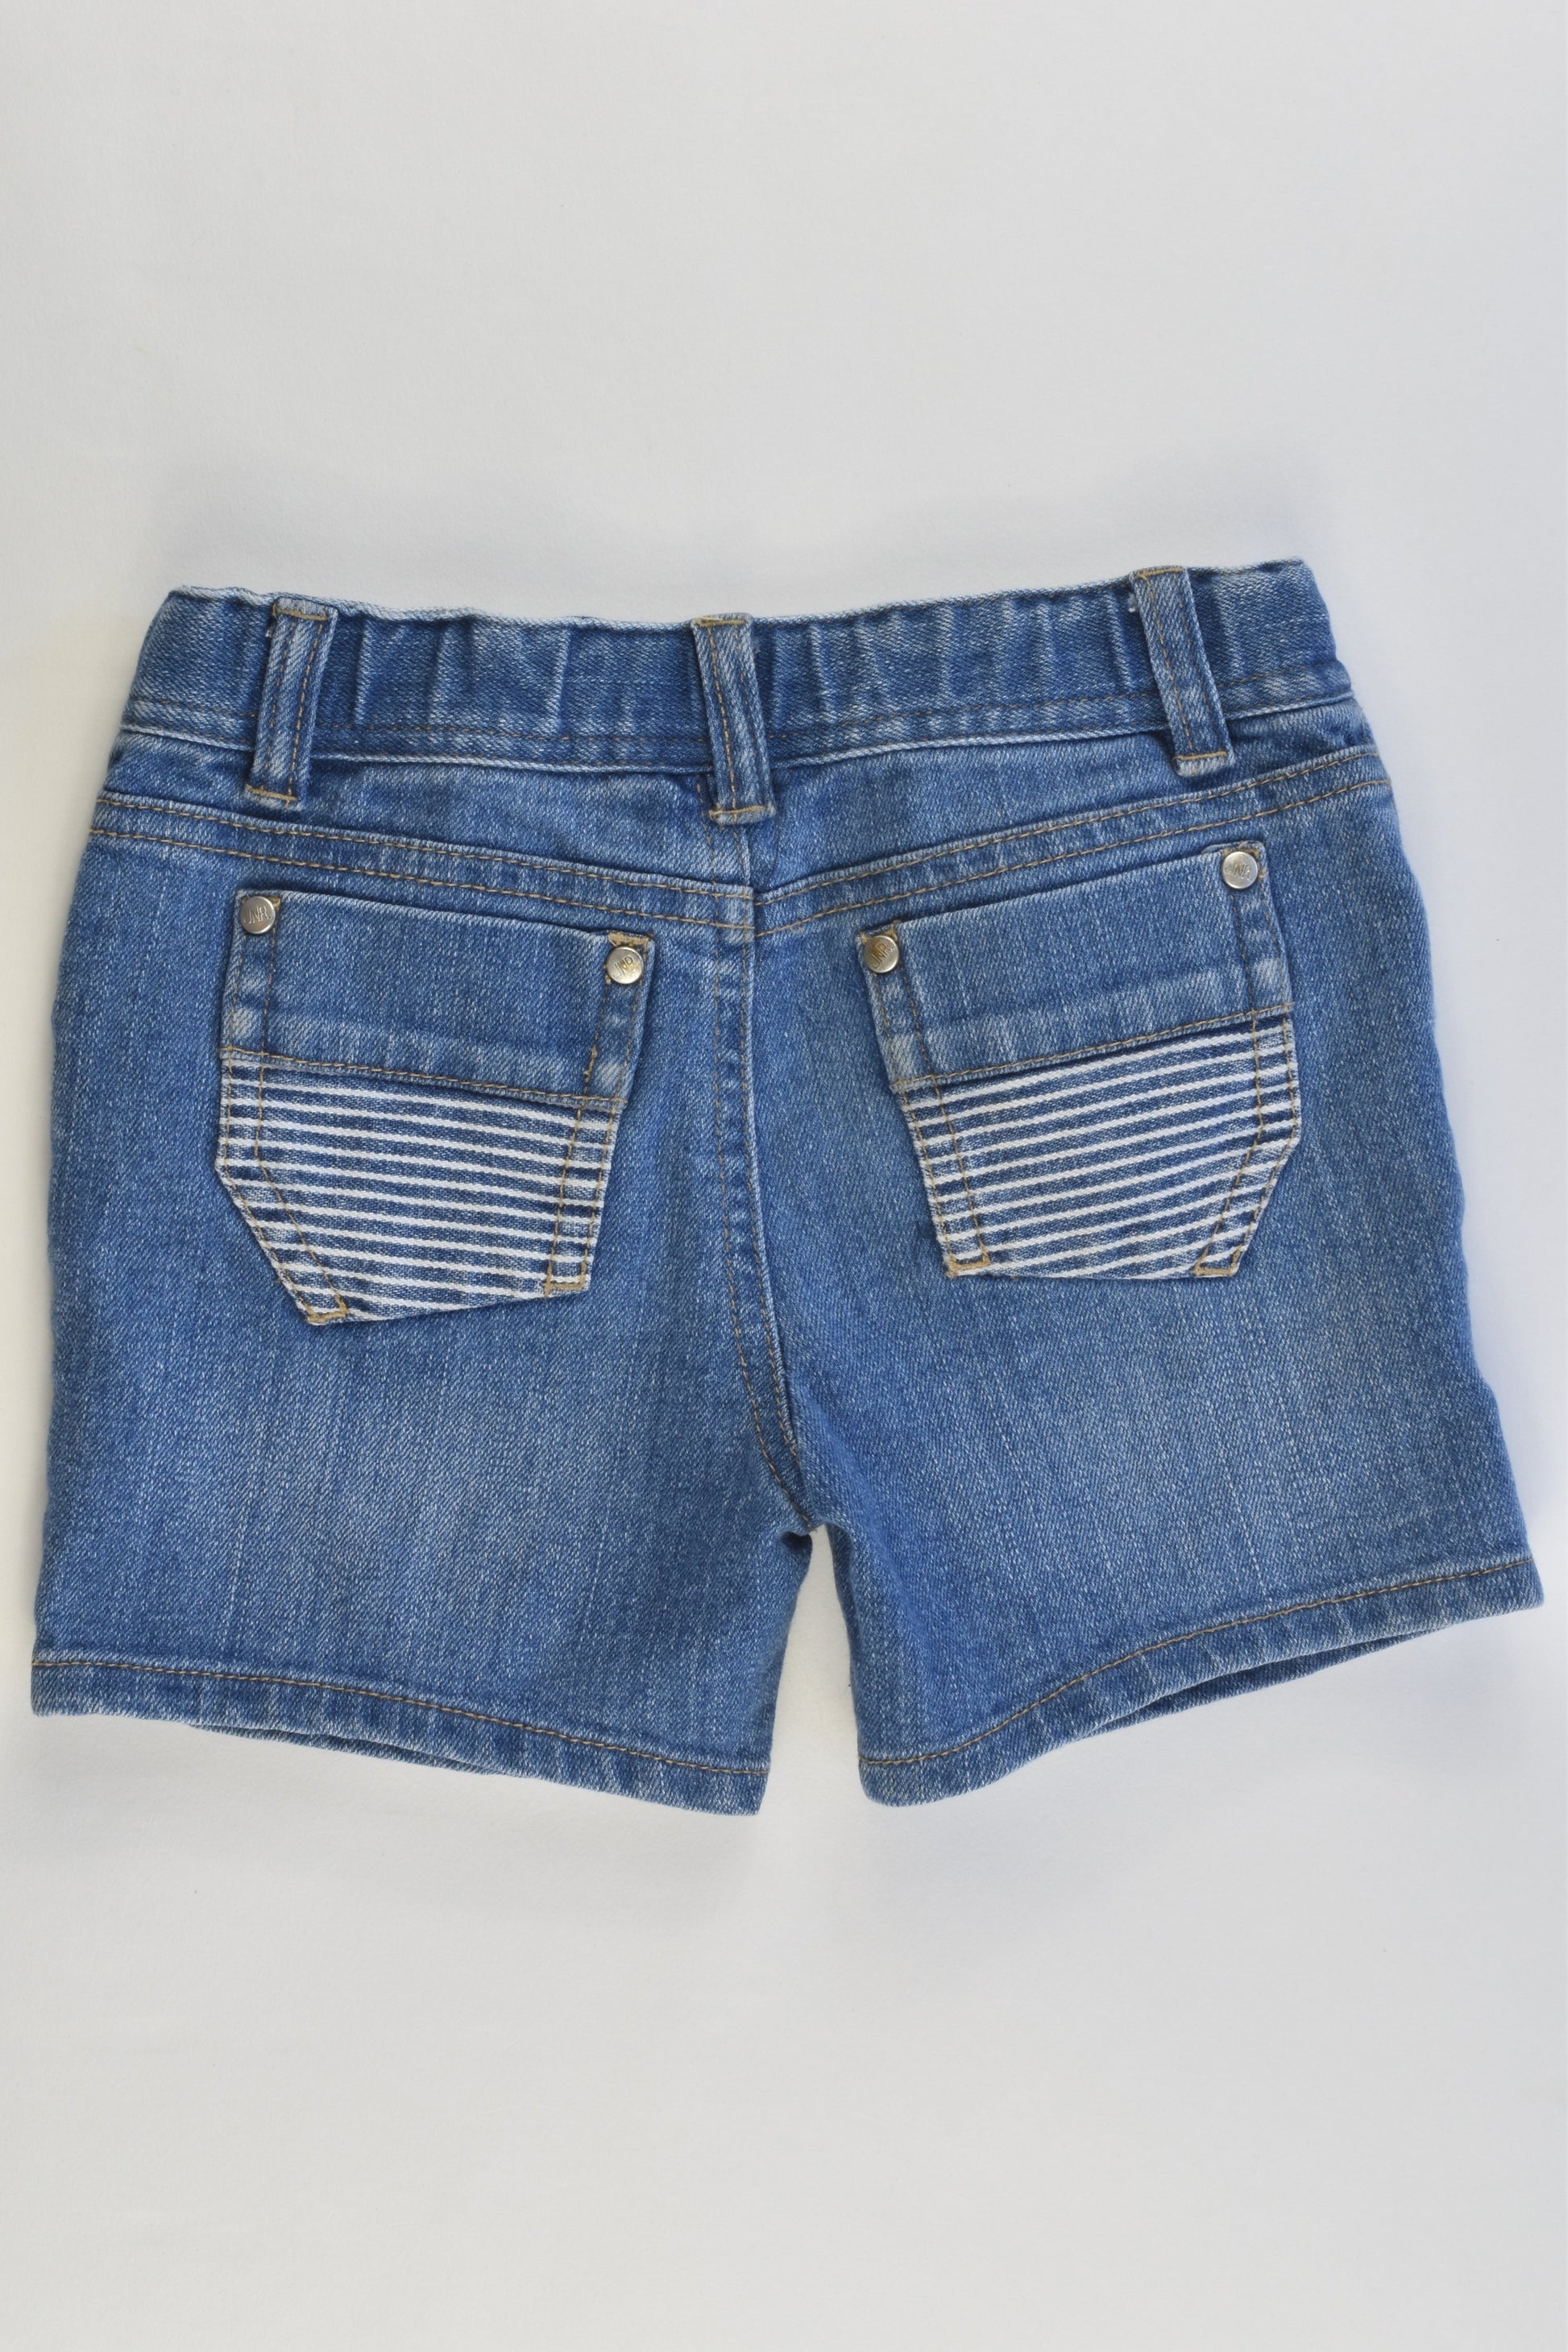 Jeanswest Jnr Size 6-12 months Soft and Stretchy Denim Shorts